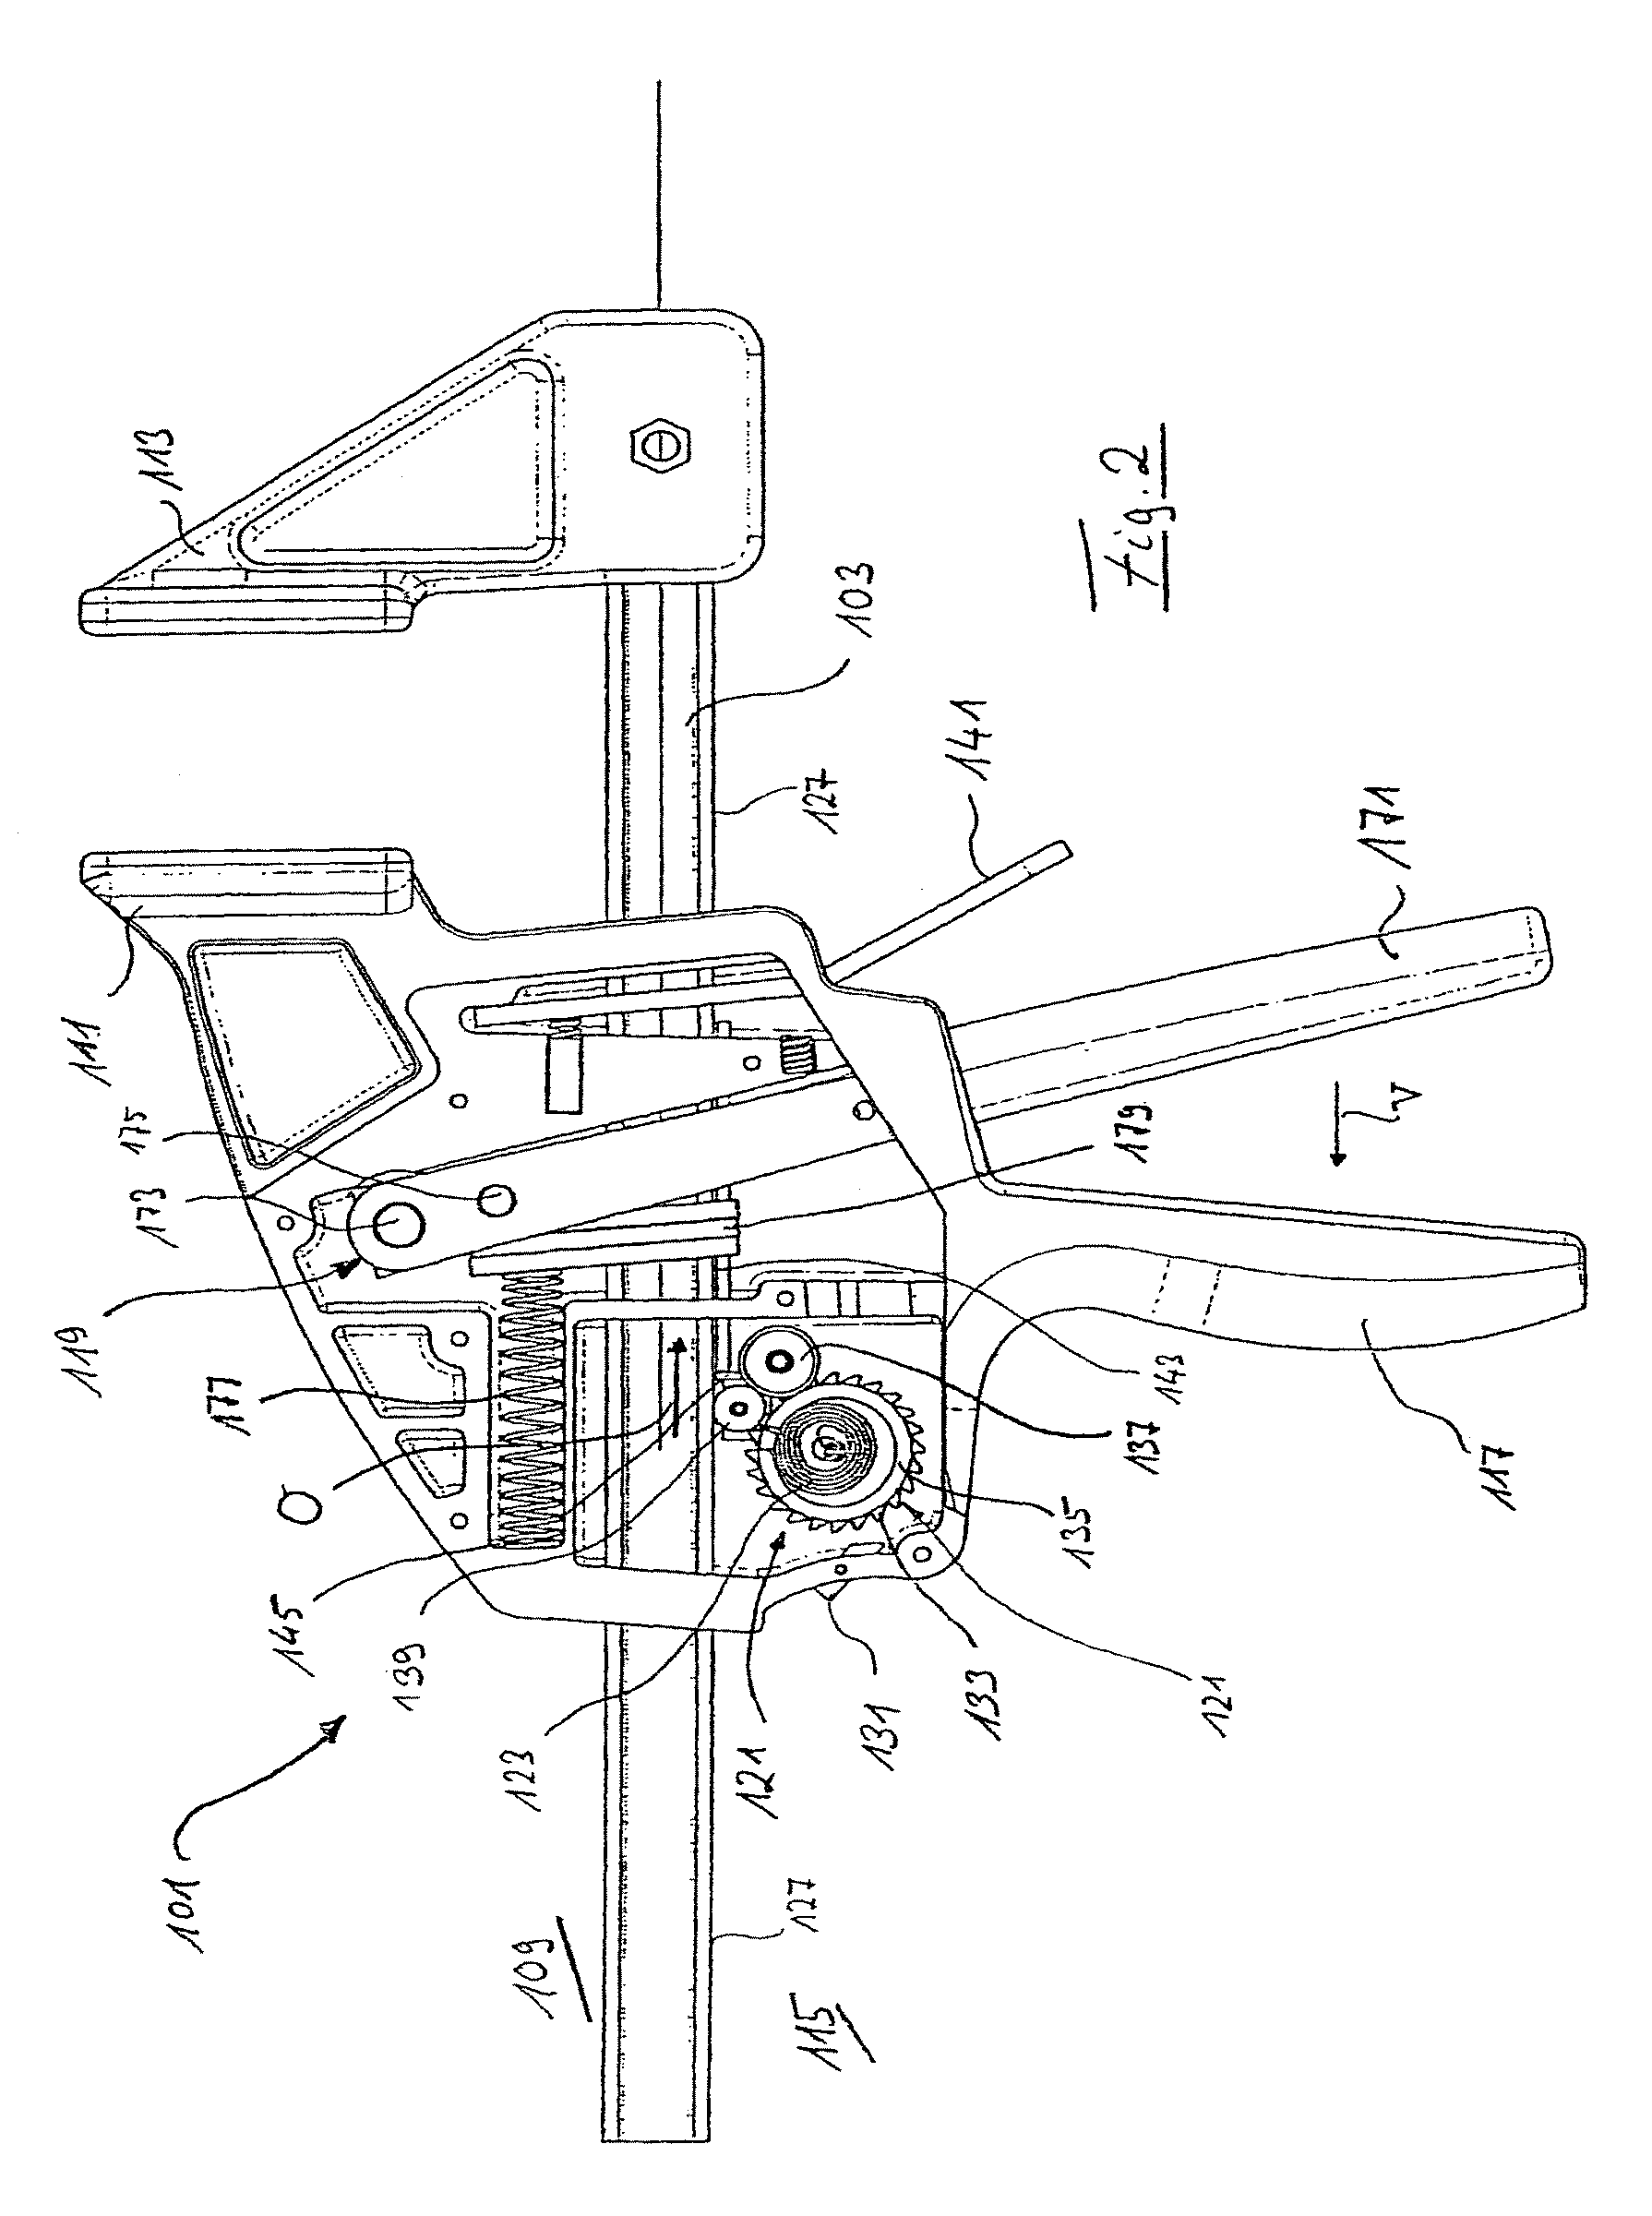 Clamping or spreading tool